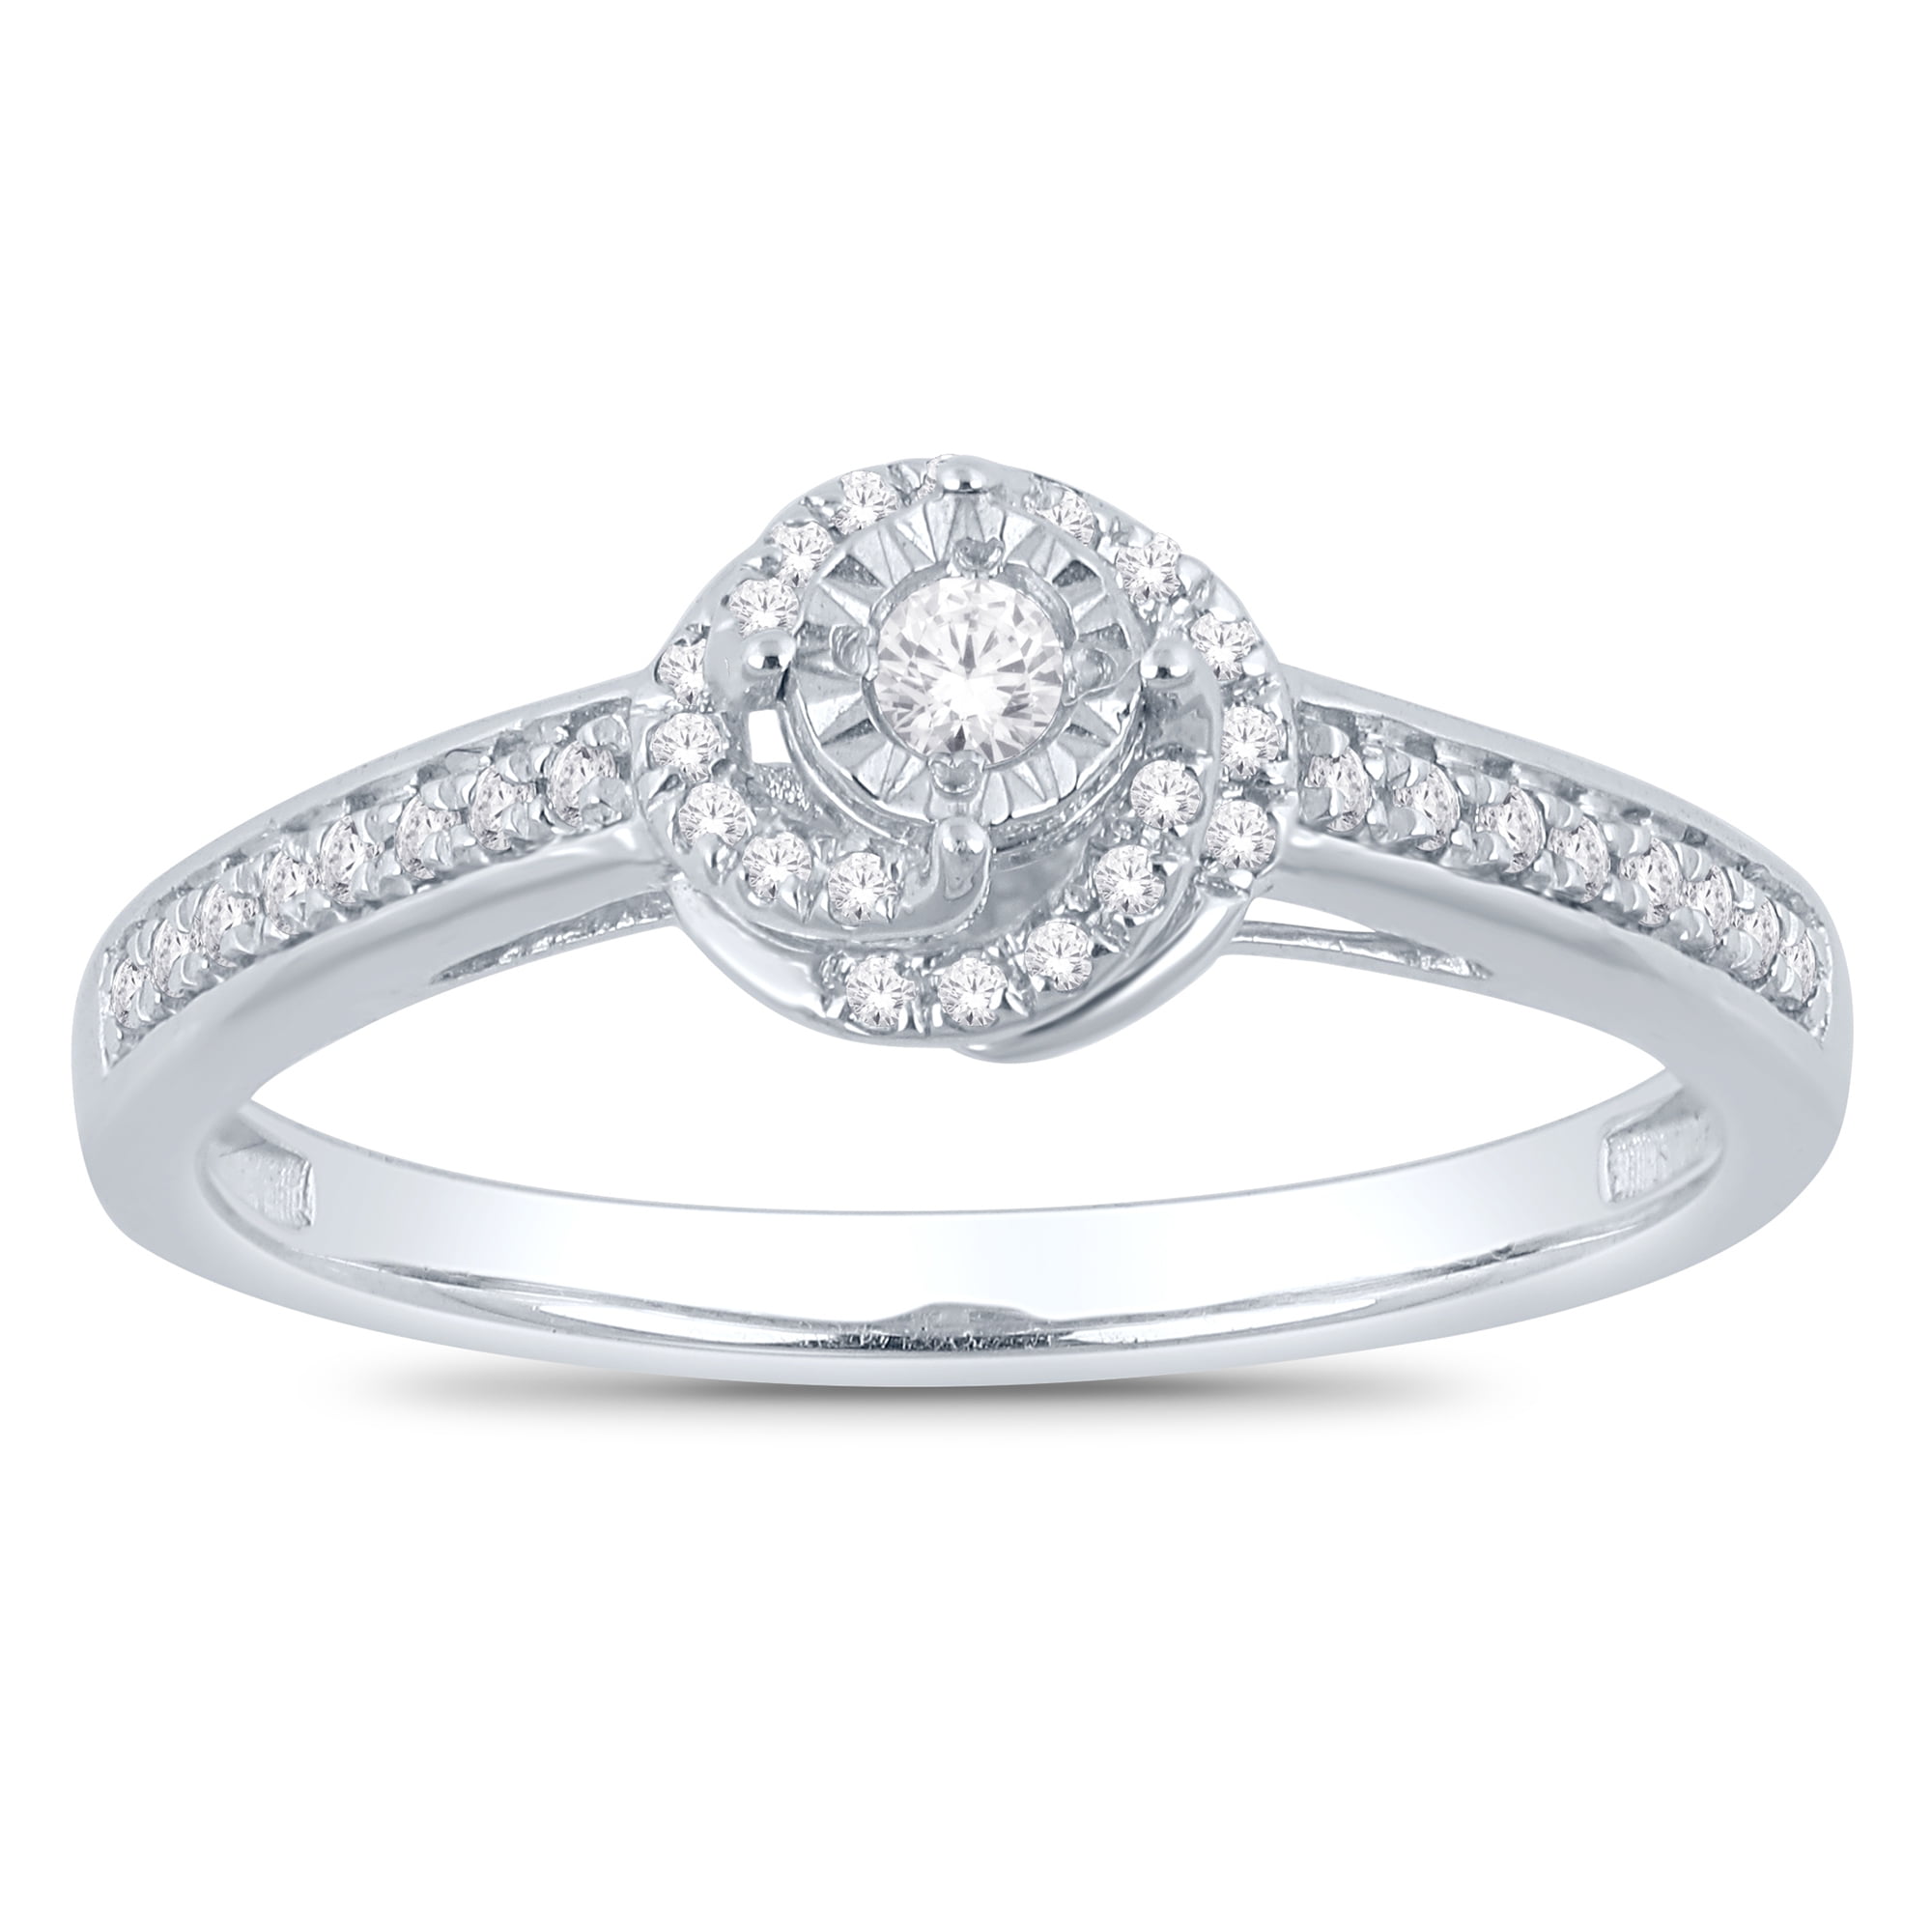 Her Special Day 10KT White Gold, 1/5 CT T.W. Diamond Promise Ring